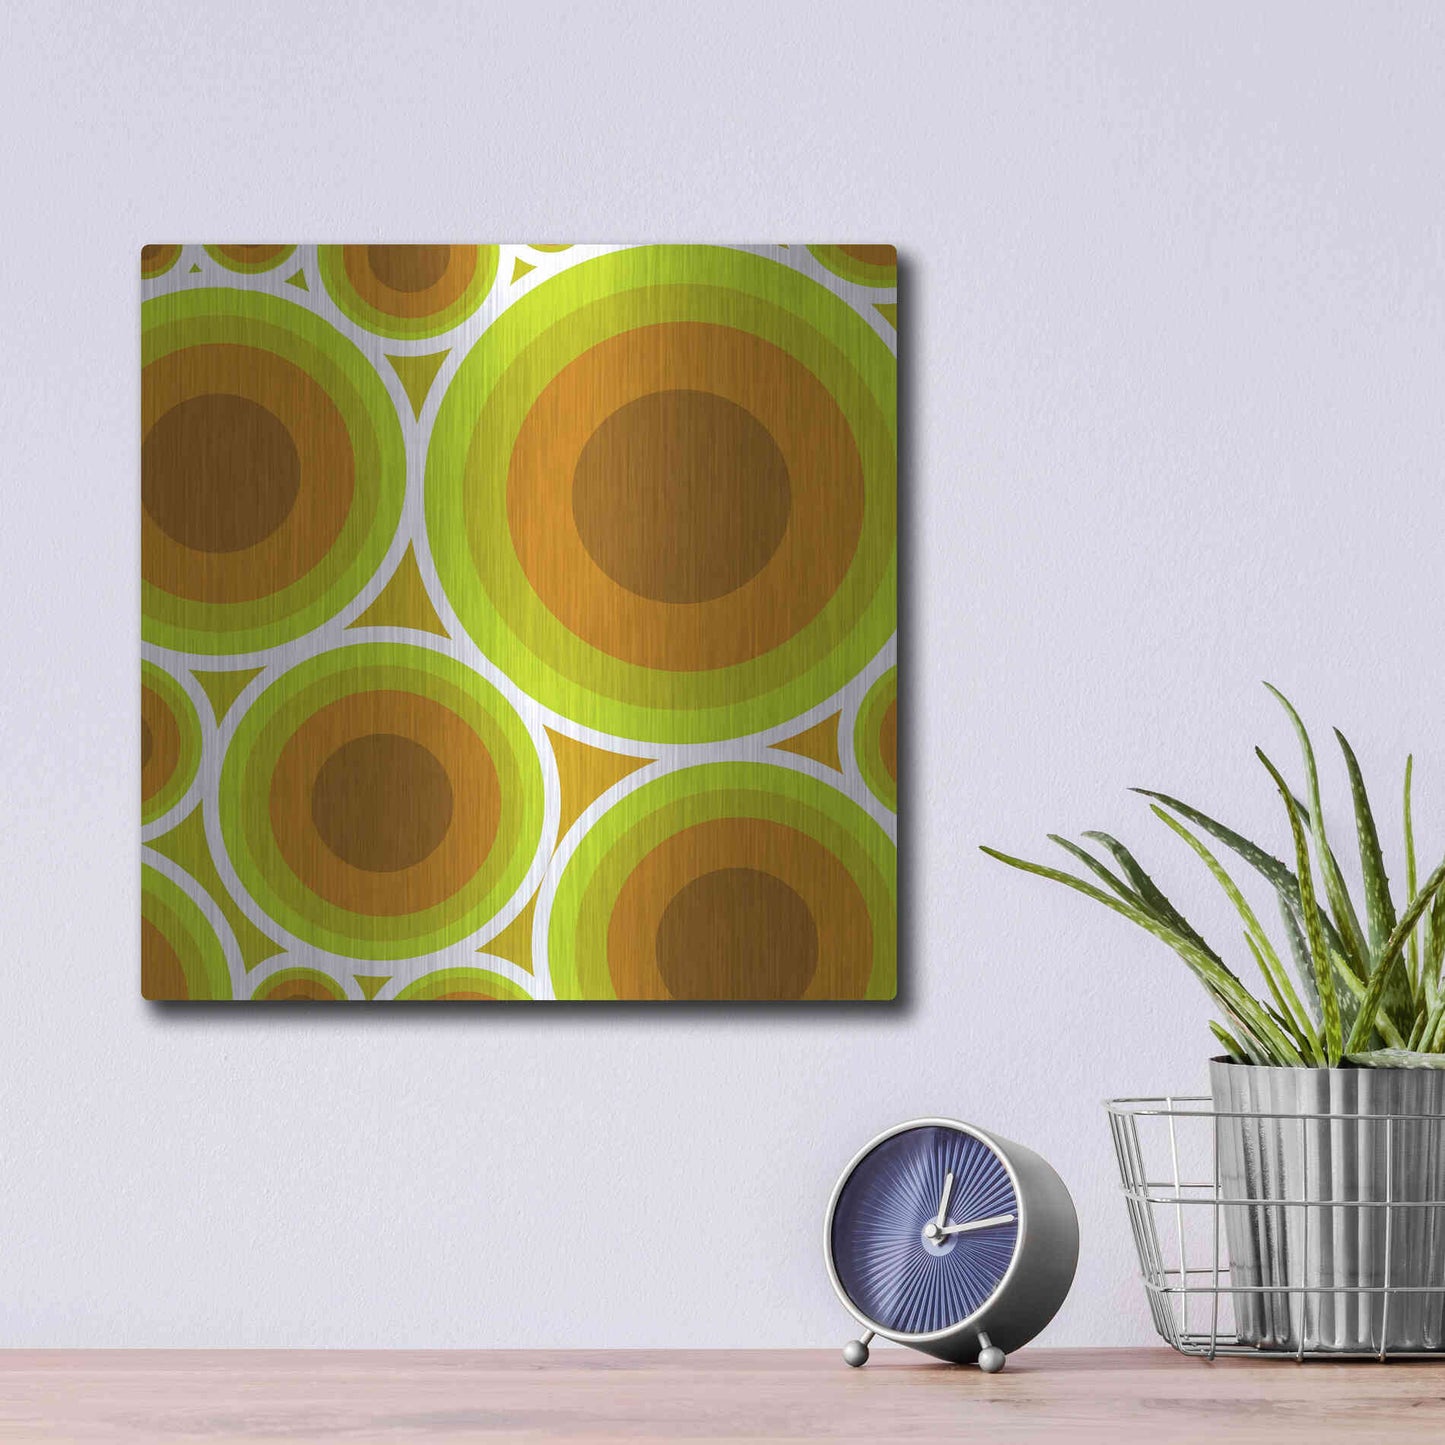 Luxe Metal Art 'Circles 2' by GraphINC, Metal Wall Art,12x12